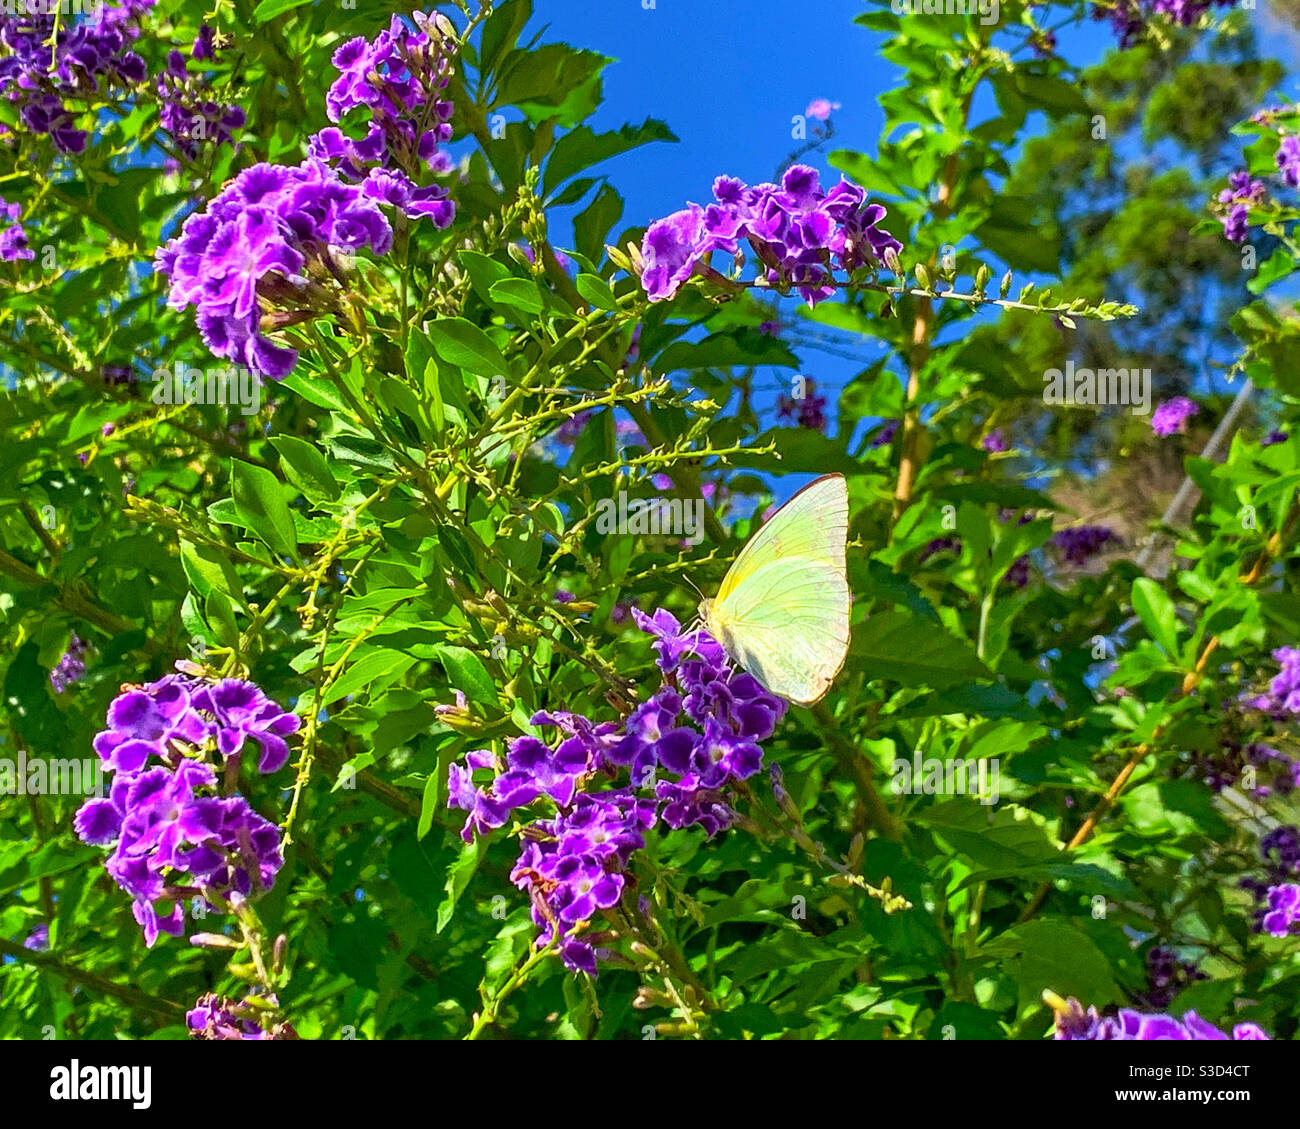 Lemon Migrant butterfly on purple and white trimmed Geisha Girl flowers, Duranta repens surrounded by leafy green foliage Stock Photo